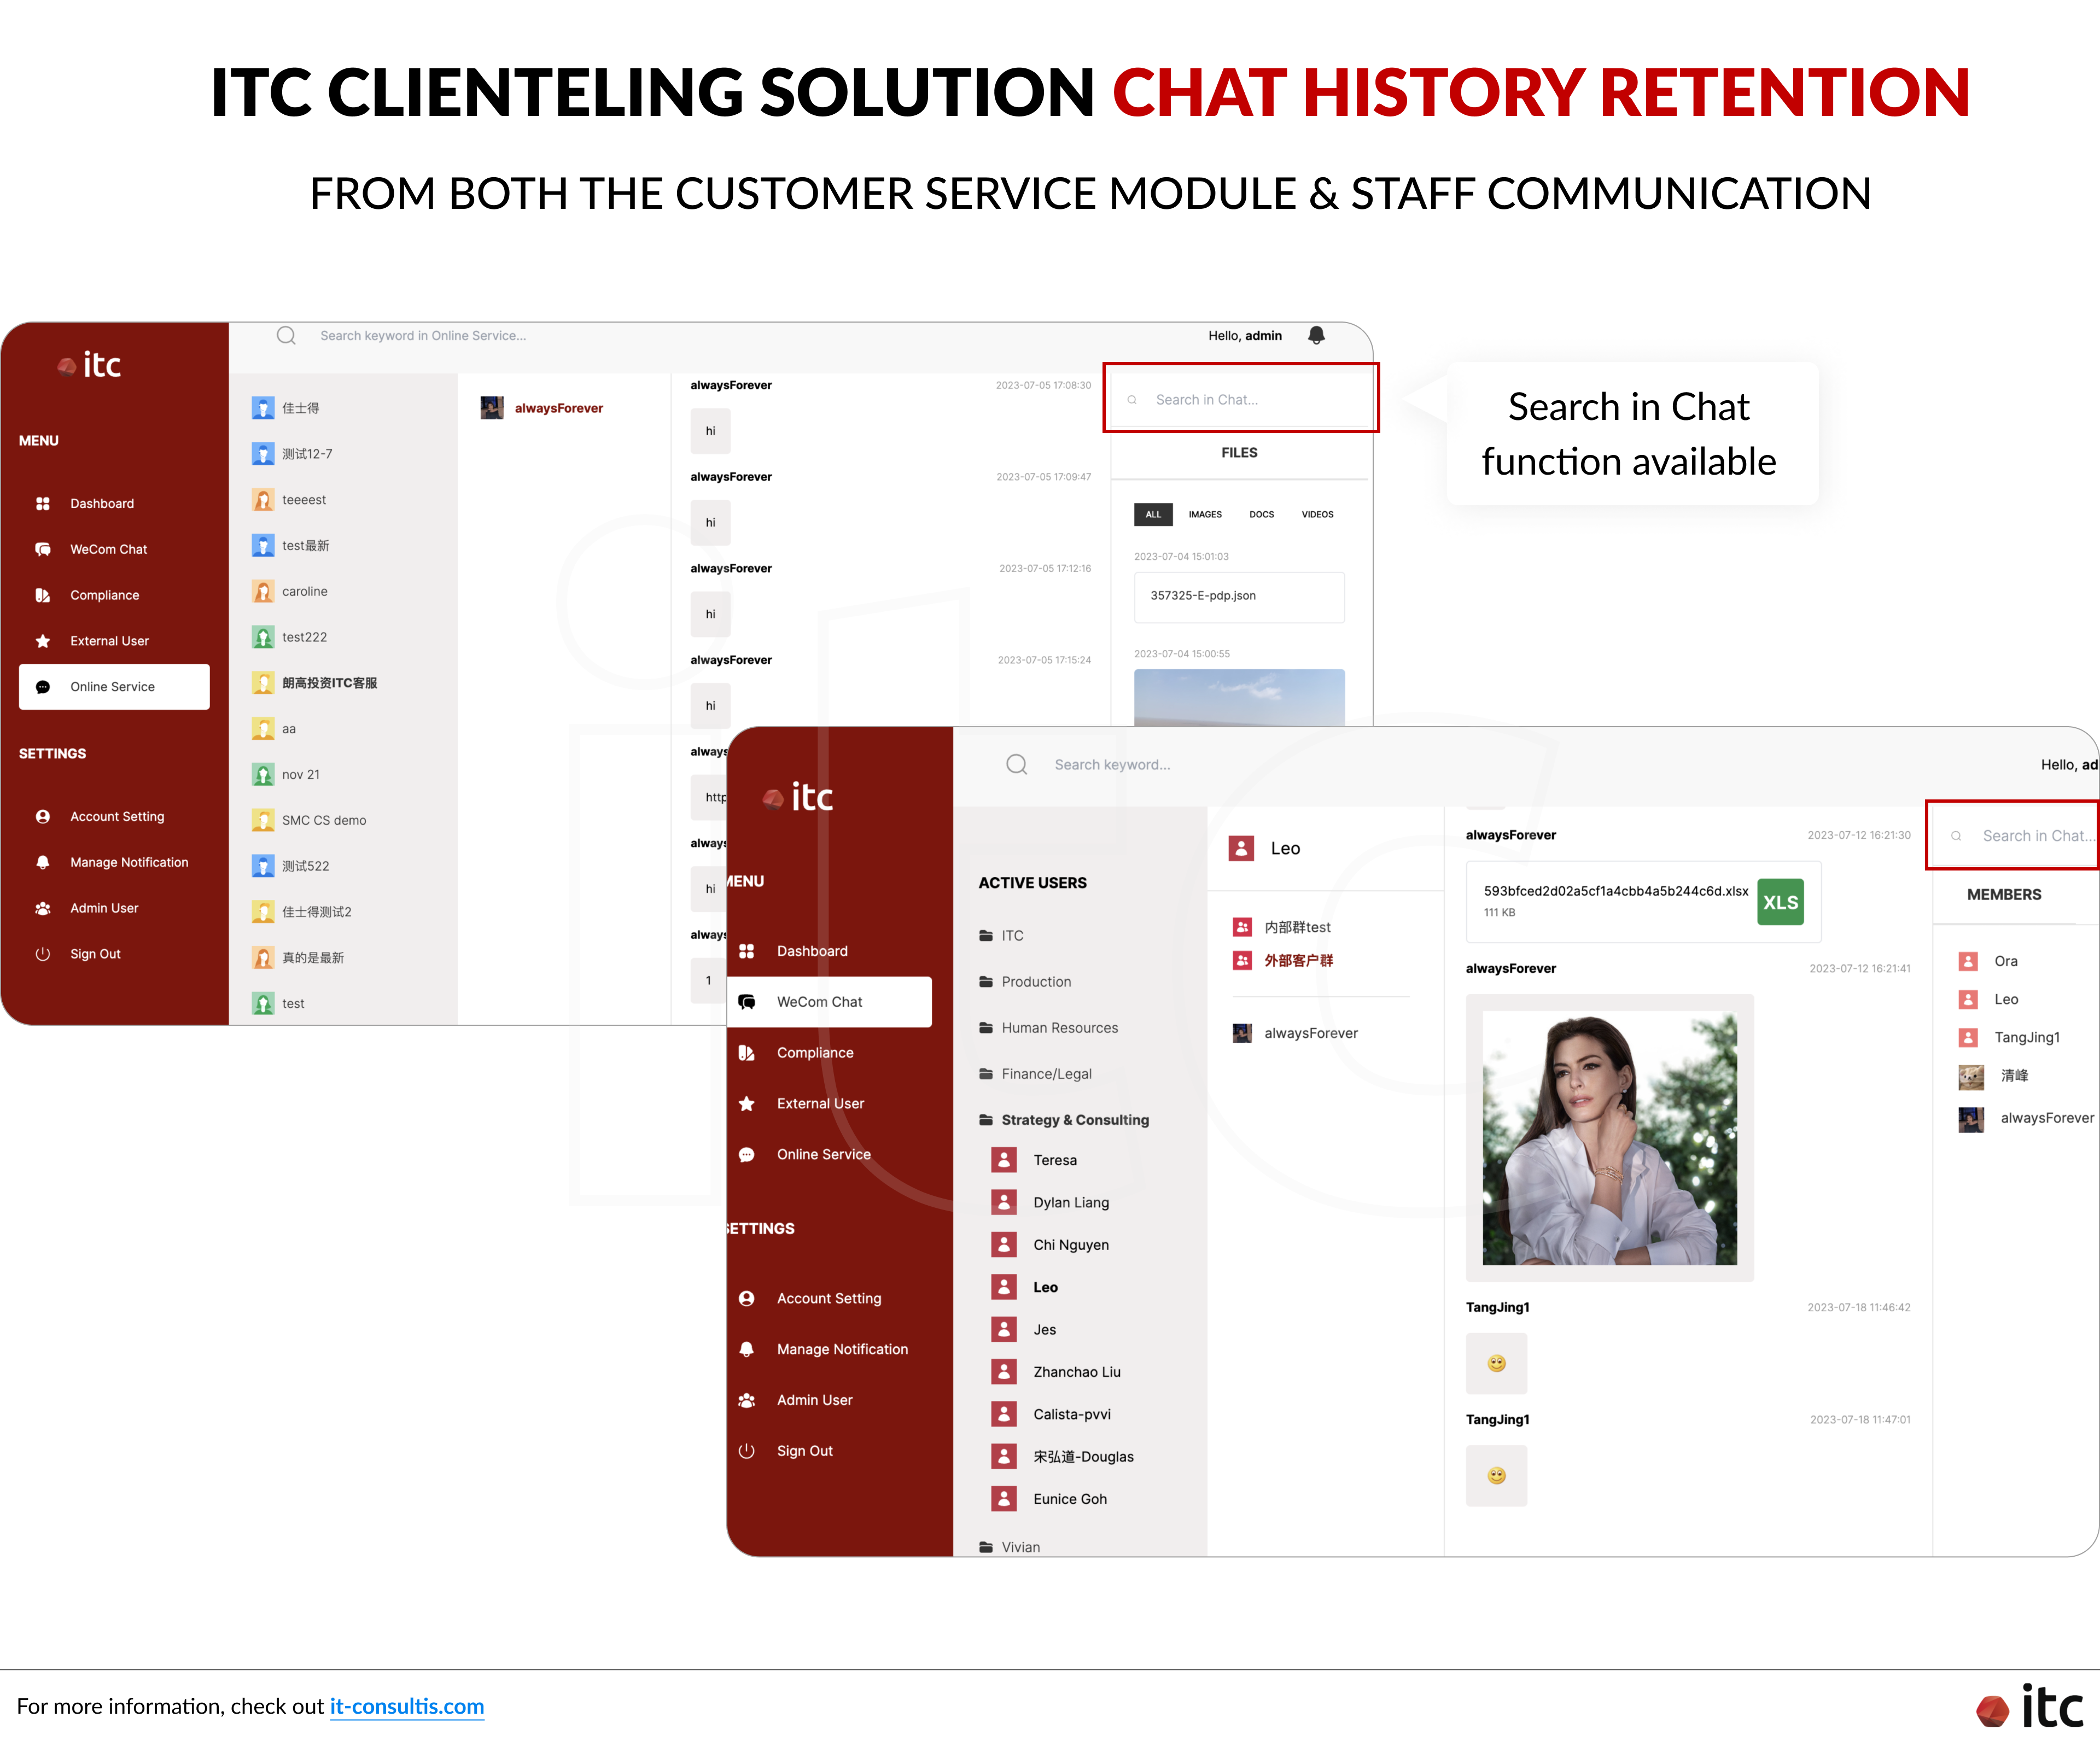 ITC Clienteling Solution chat history retention capability from both the customer service module and staff communication